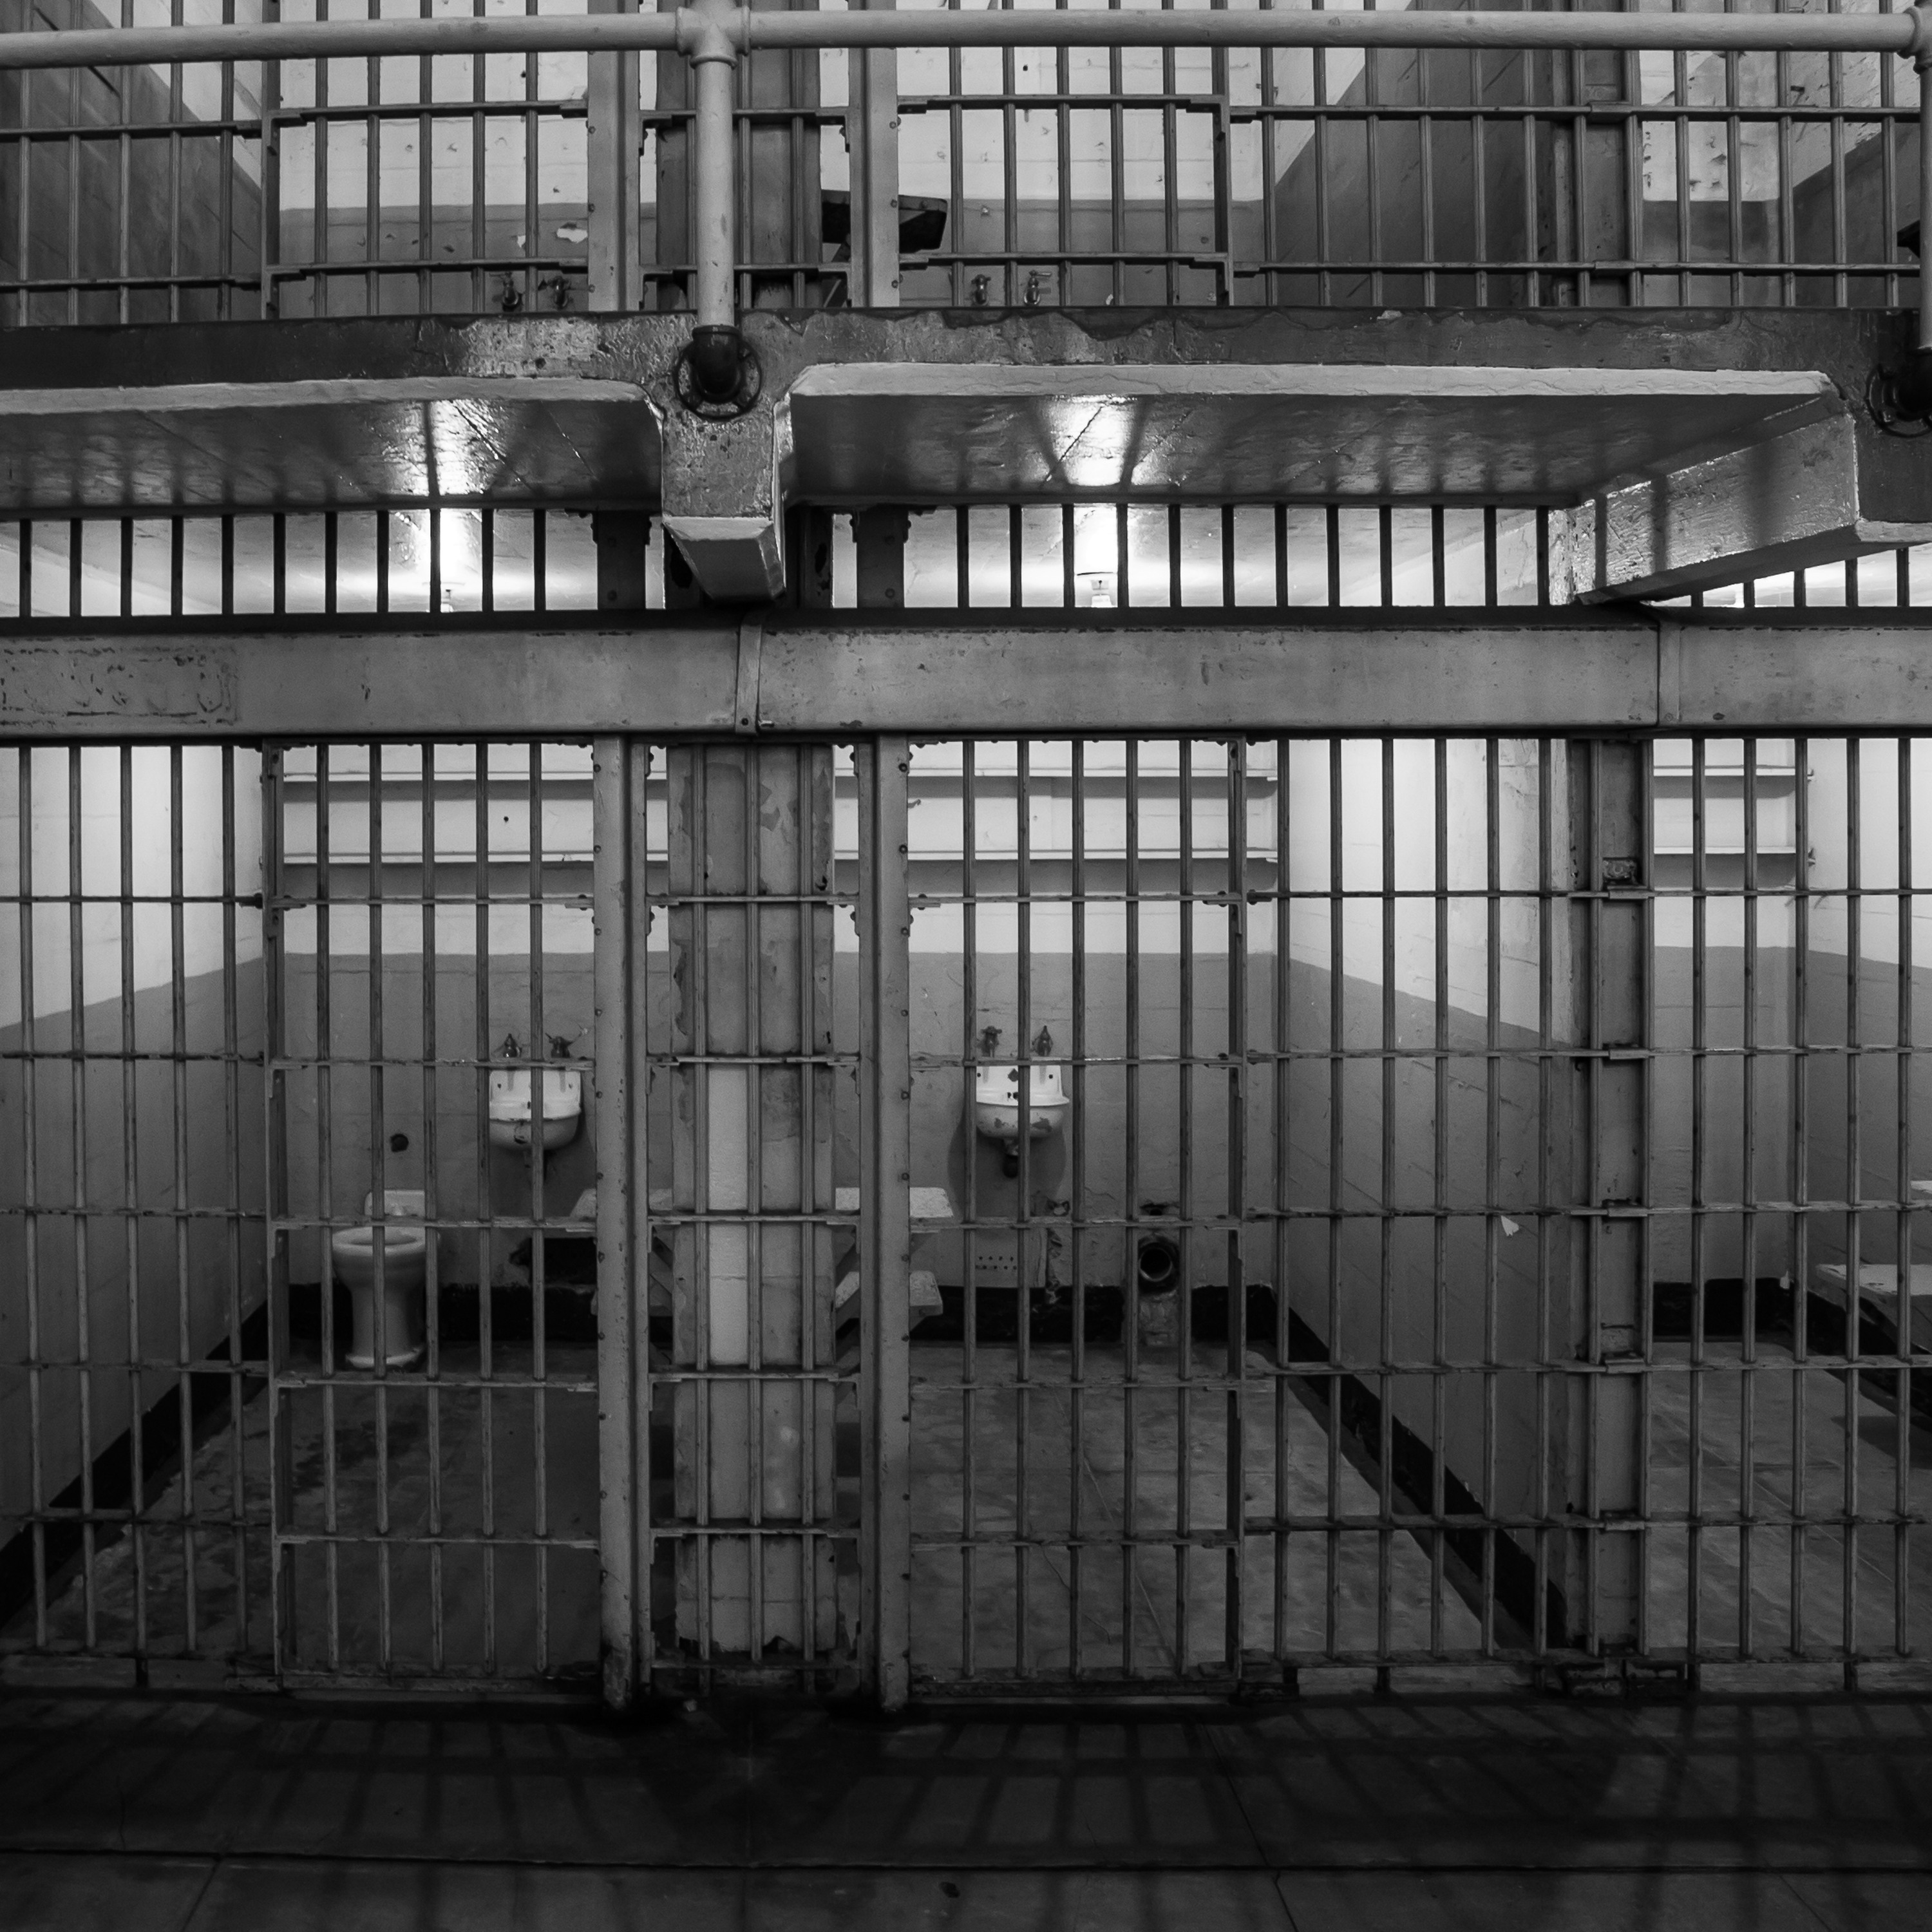 The Accuracy, Fairness, and Limits of Predicting Recidivism